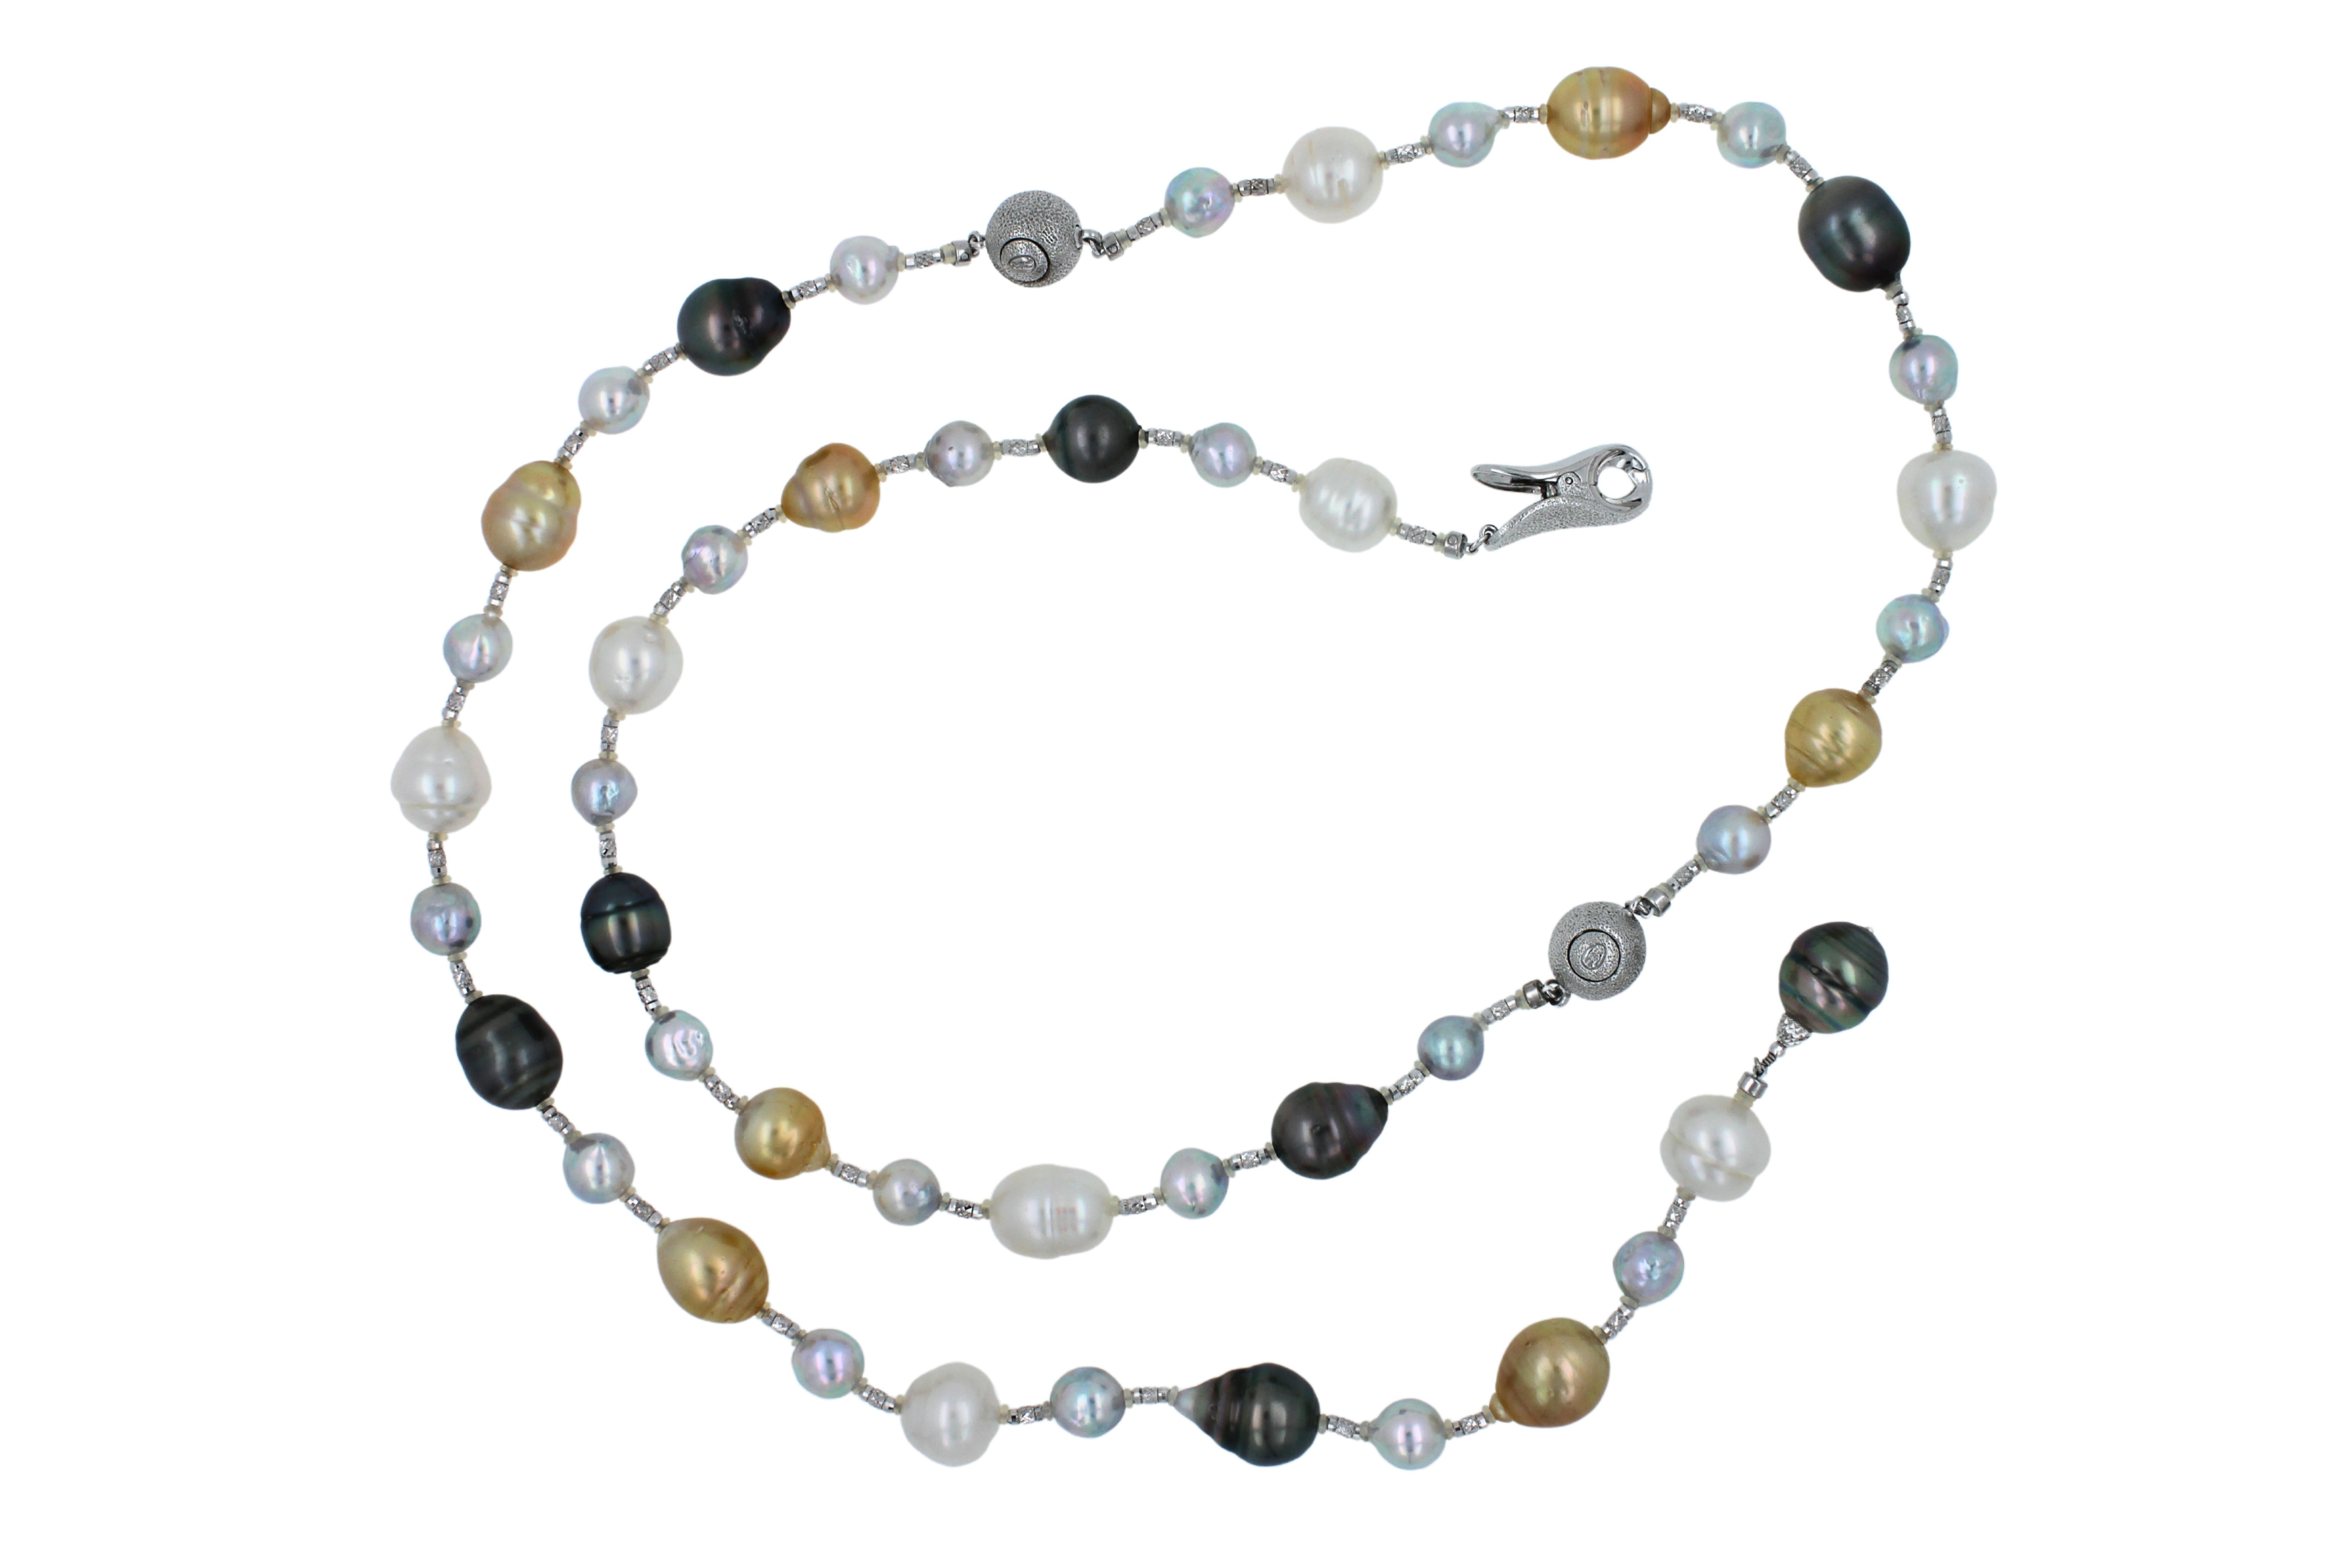 Yellow Golden White South Sea Tahitian Pearls Gold Adjustable Lariat Necklace & Bracelet Combo
18 Karat White Gold
South Sea Pearls *Golden & White & Silver
Tahitian Pearls *Dark Grey & Black 
Adjustable Length From Choker to 24 inches Lariat 
Can